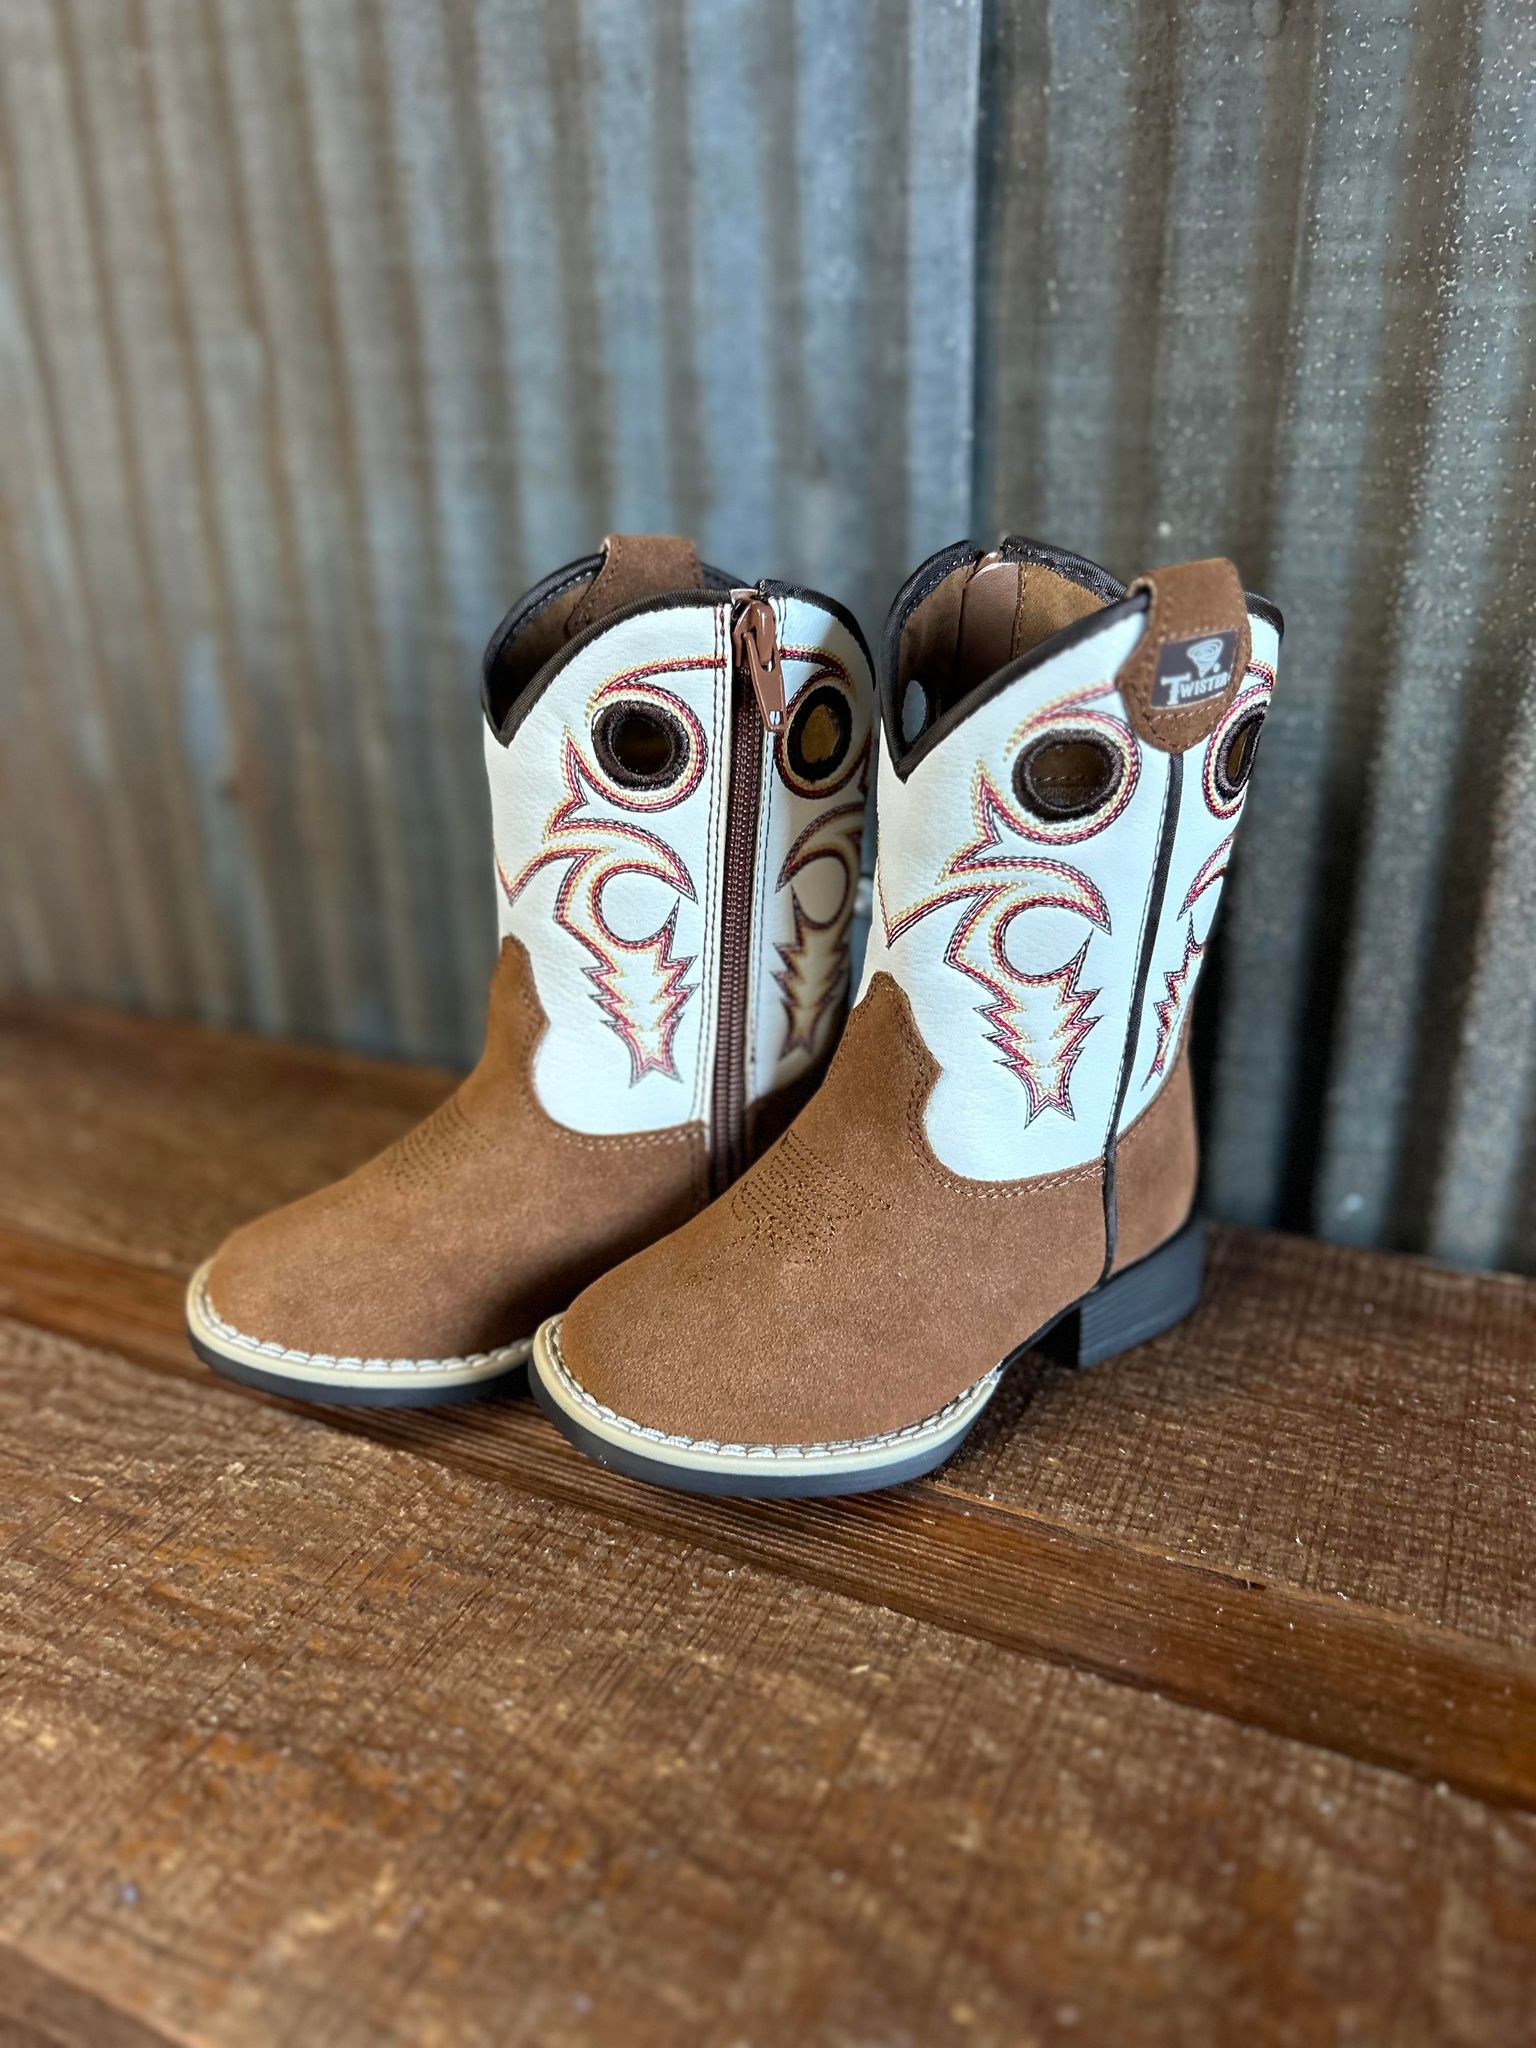 Twister Trey Toddler Boots-Kids Boots-M & F Western Products-Lucky J Boots & More, Women's, Men's, & Kids Western Store Located in Carthage, MO